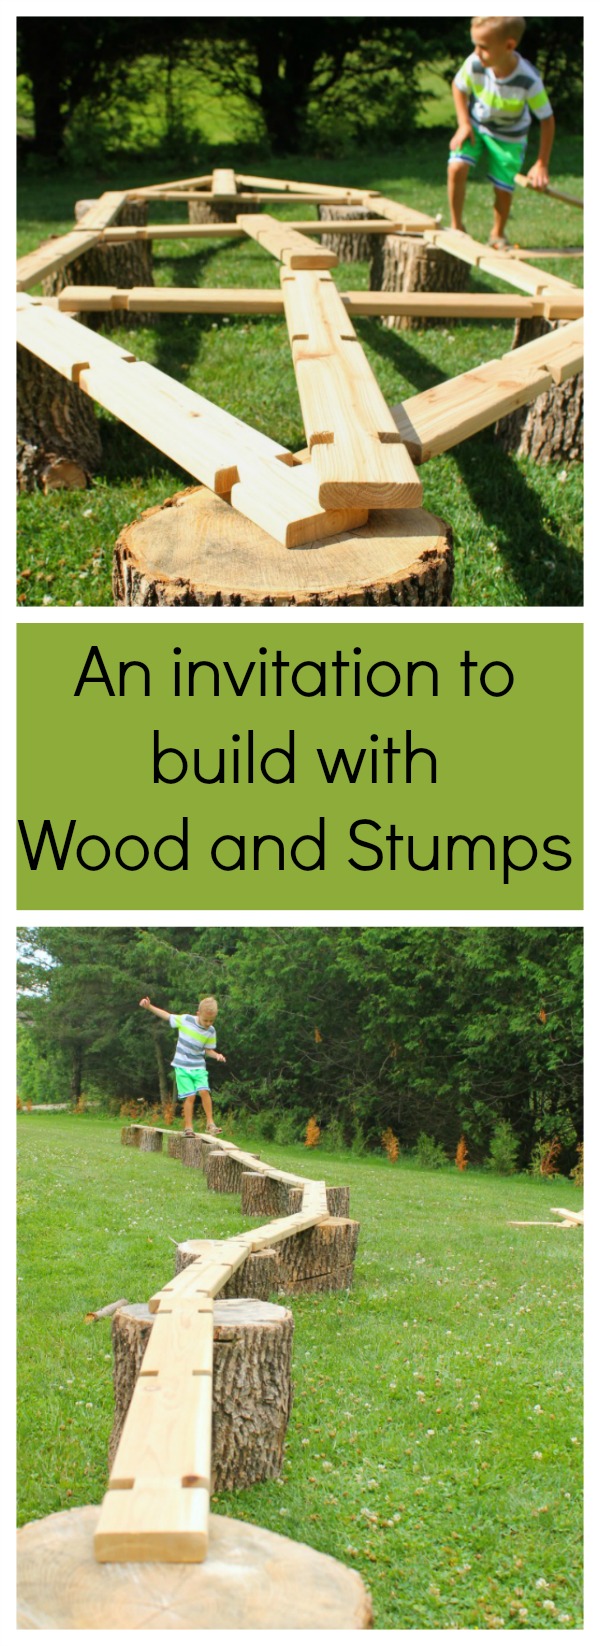 A simple invitation to build big and create with wood. Balance beams, boats - you name it. Great for heavy work and gross motor development, plus just plain old outdoor fun!